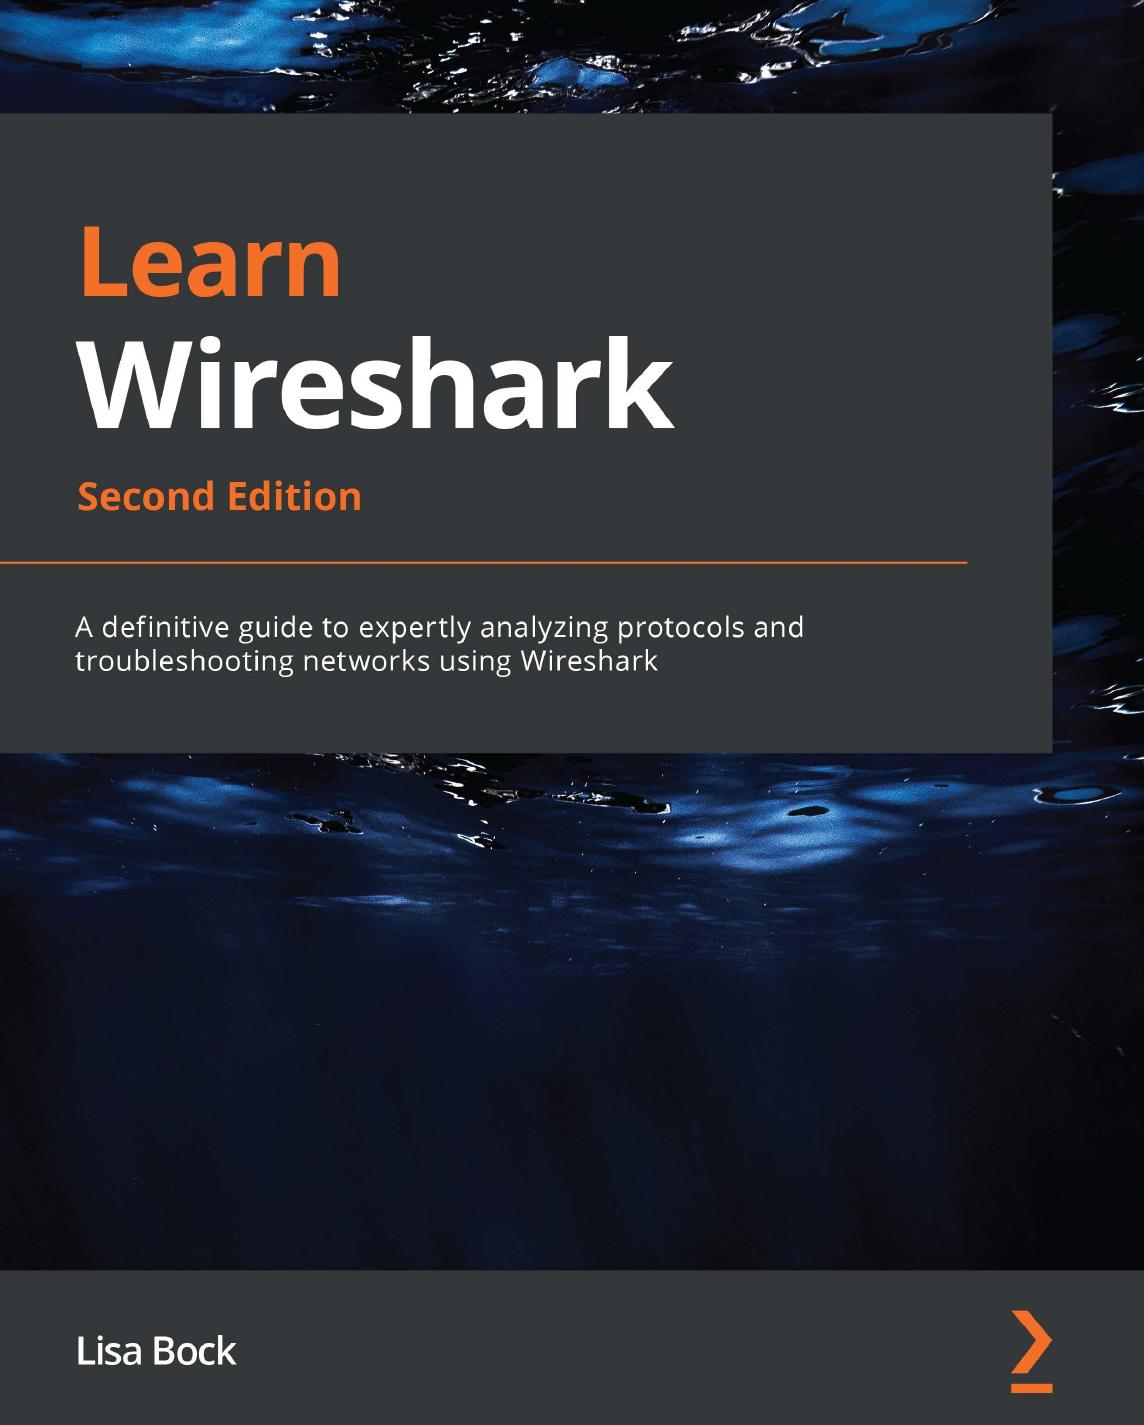 Learn Wireshark - A definitive guide to expertly analyzing protocols and troubleshooting networks using Wireshark - 2nd Edition (2022) by Packt